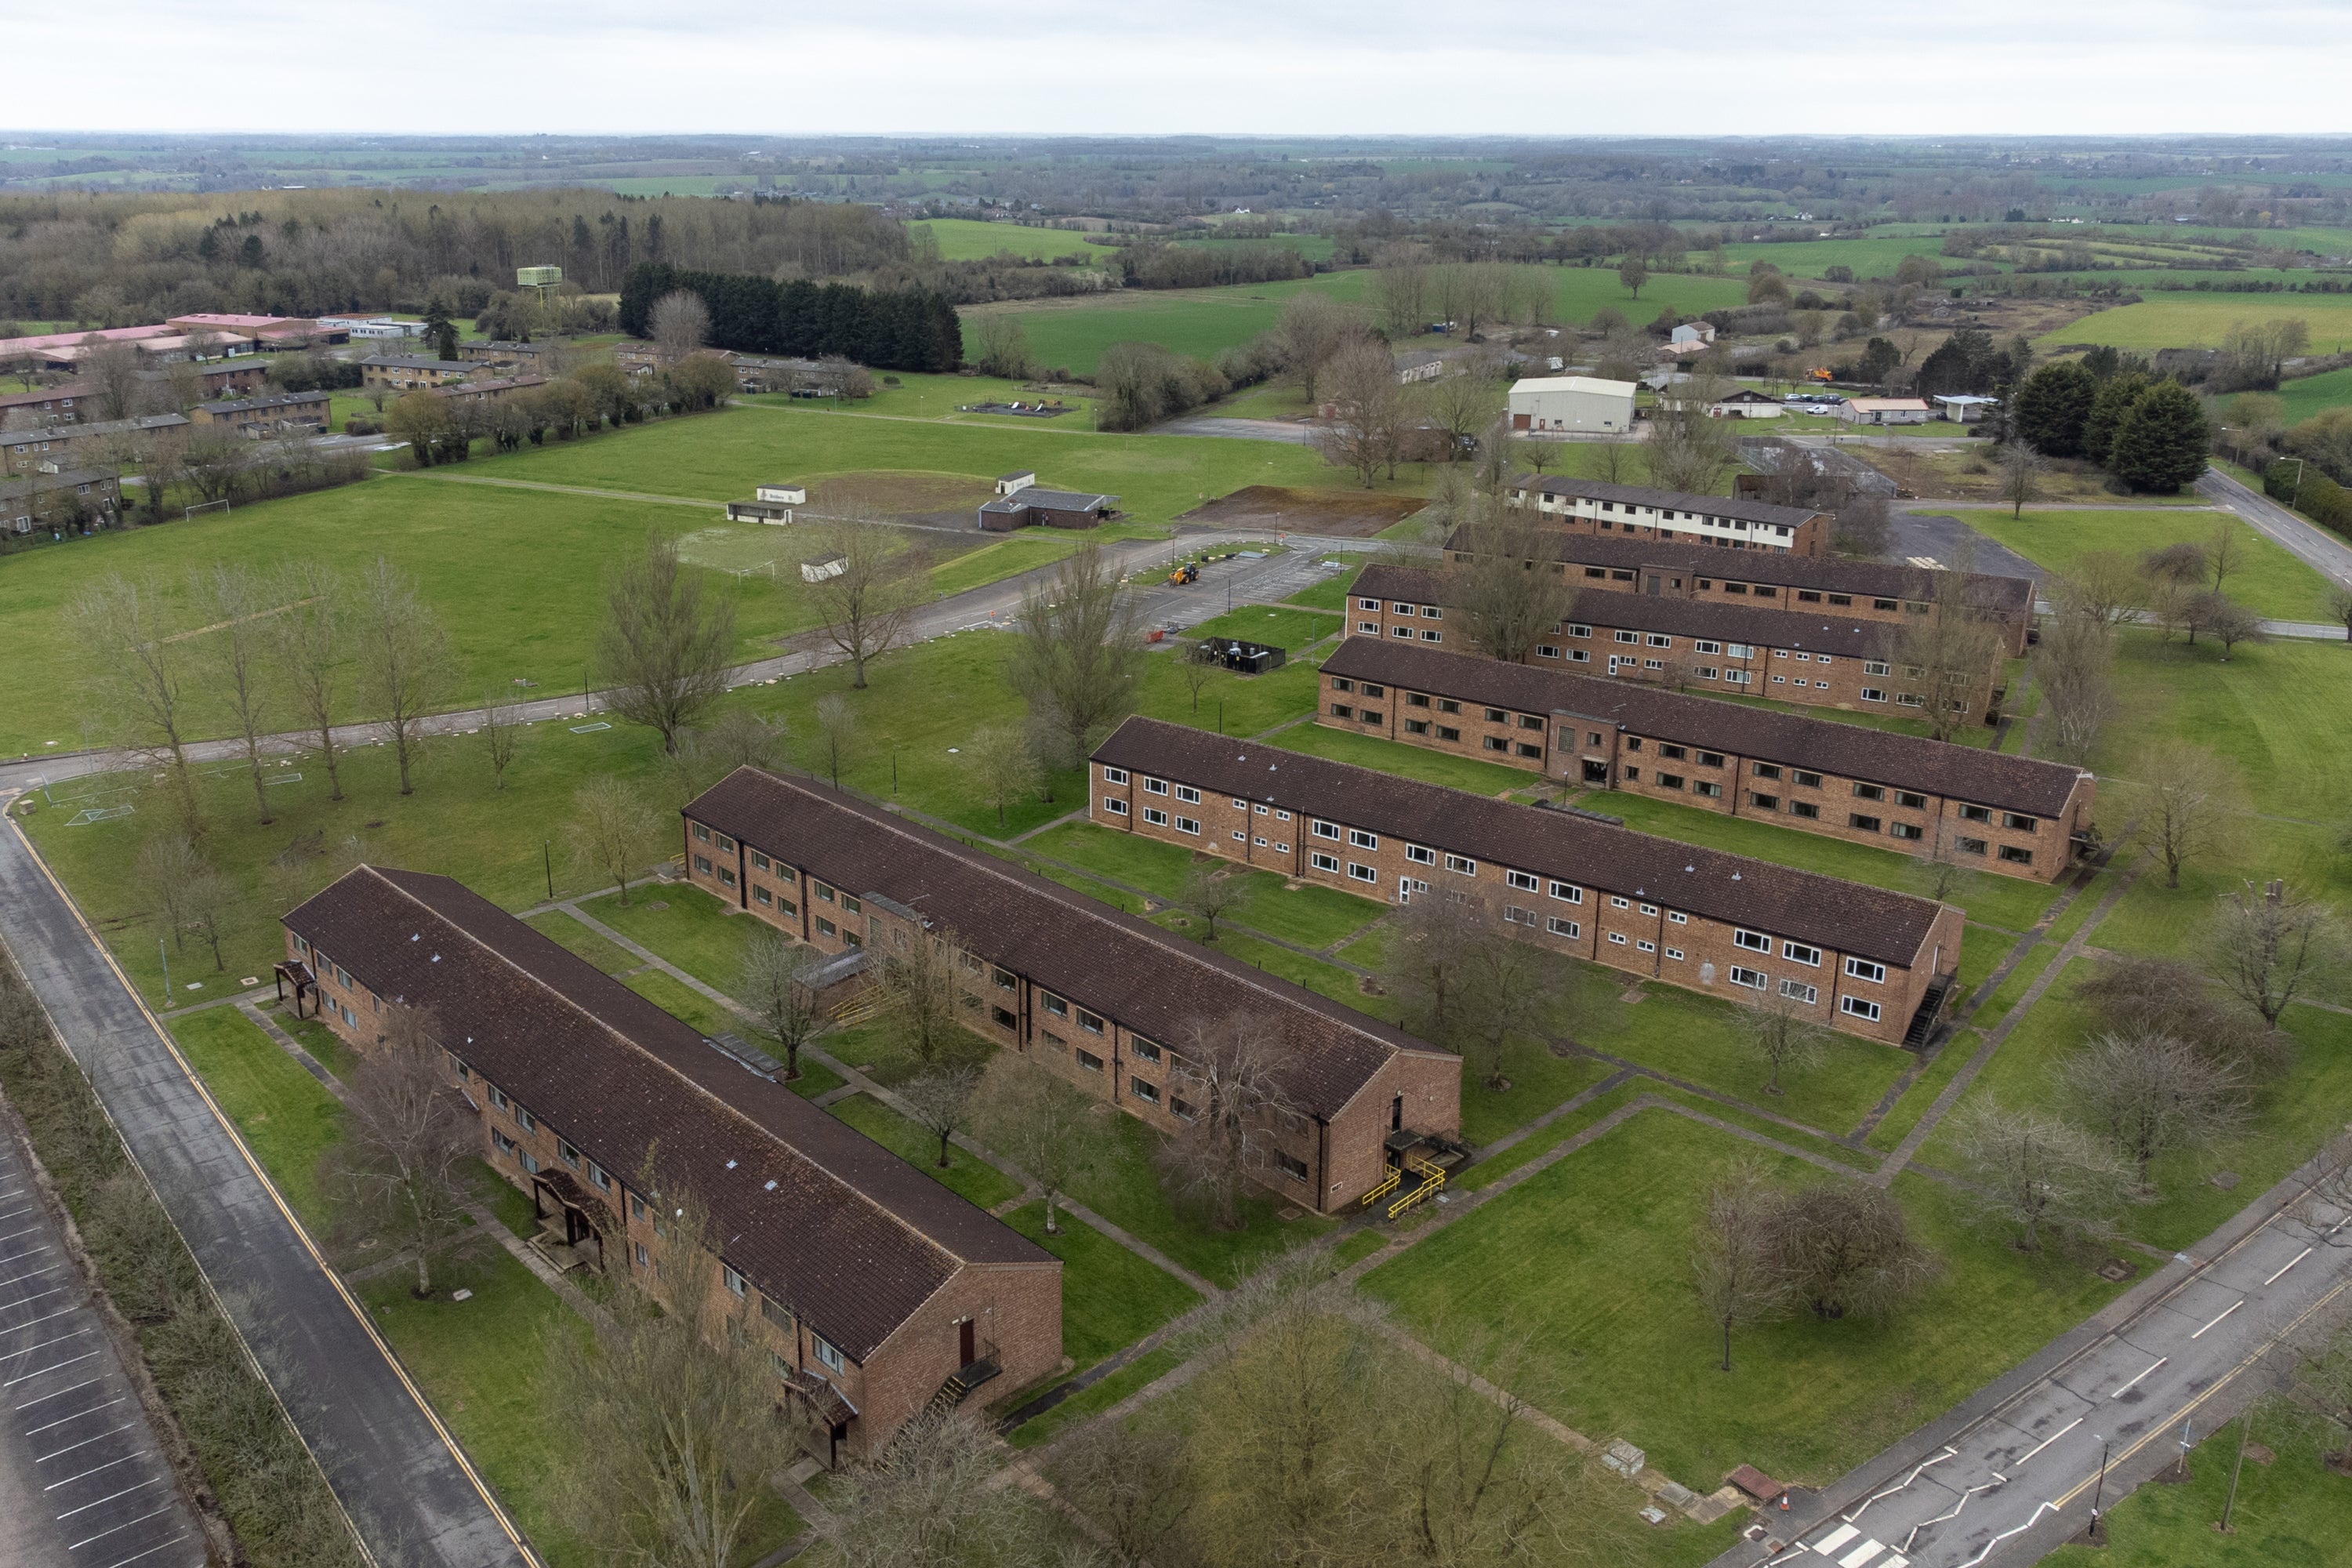 Wethersfield is a former RAF base now housing up to 580 asylum seekers